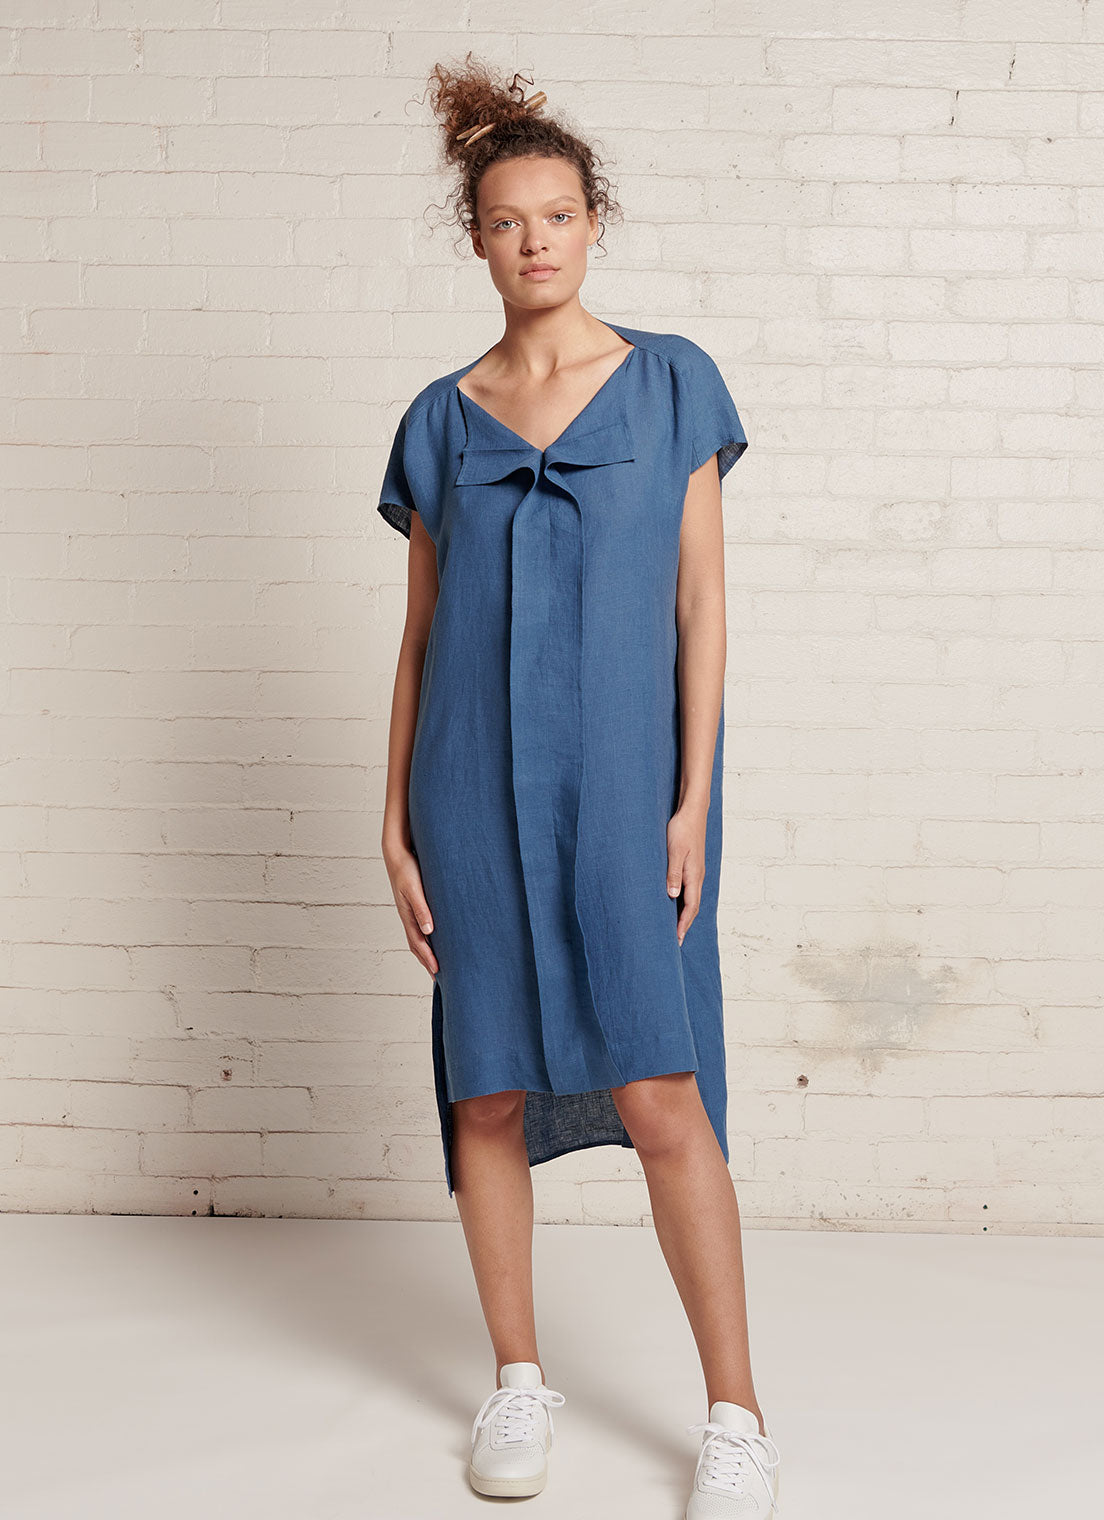 An indigo, knee-length linen dress with short sleeves, open neckline and centre front pleat detail made from yarn dye washed linen